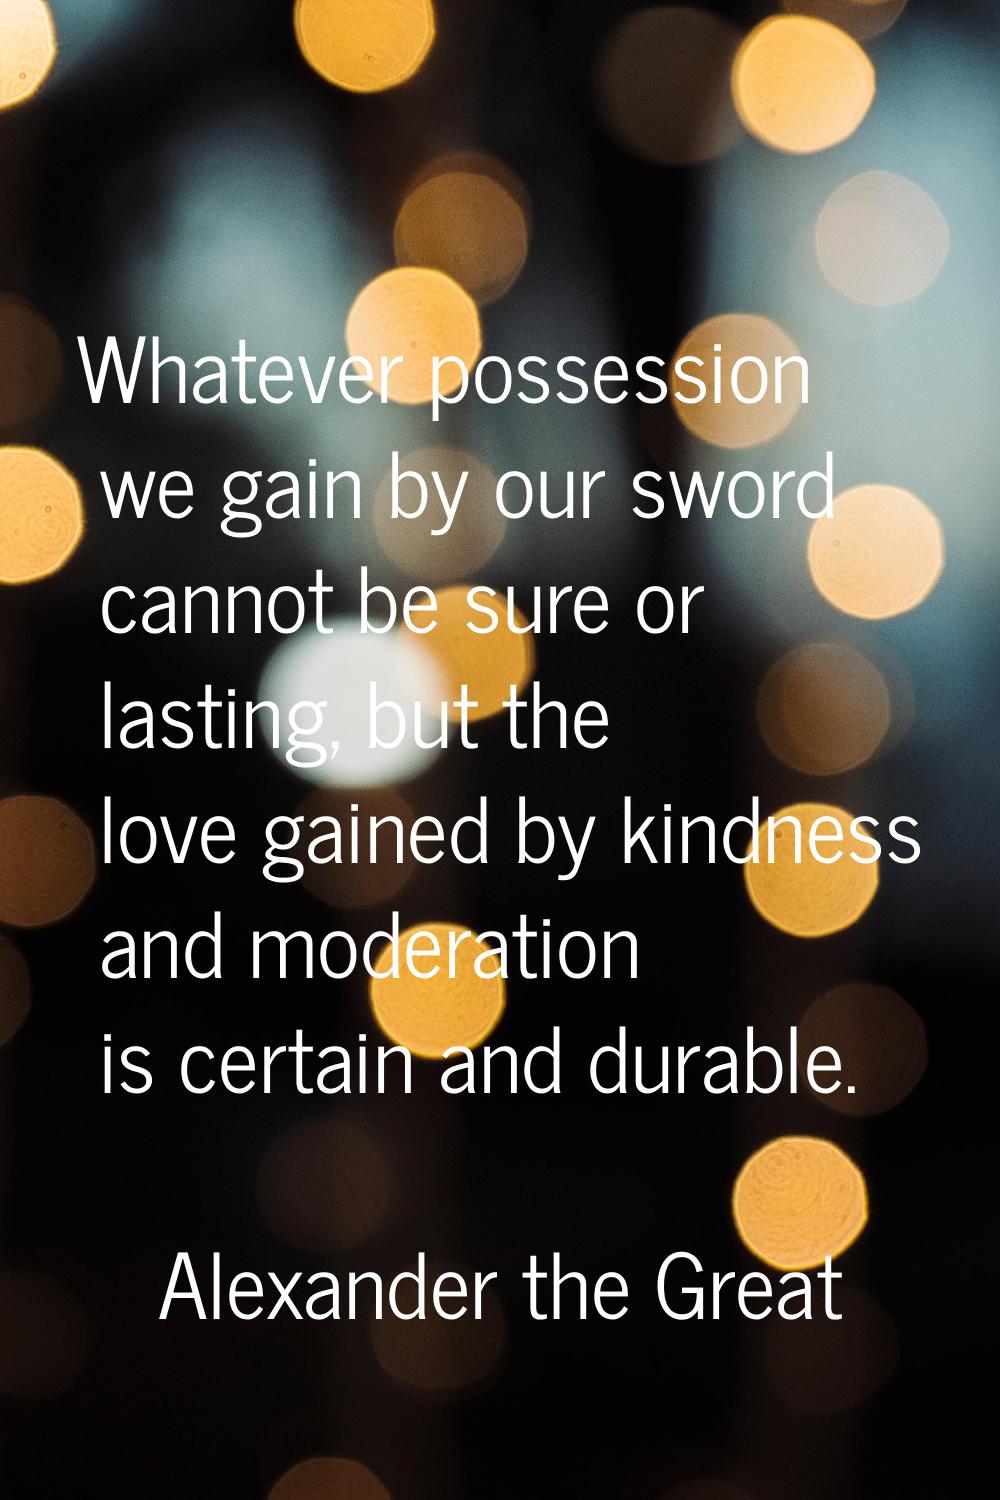 Whatever possession we gain by our sword cannot be sure or lasting, but the love gained by kindness